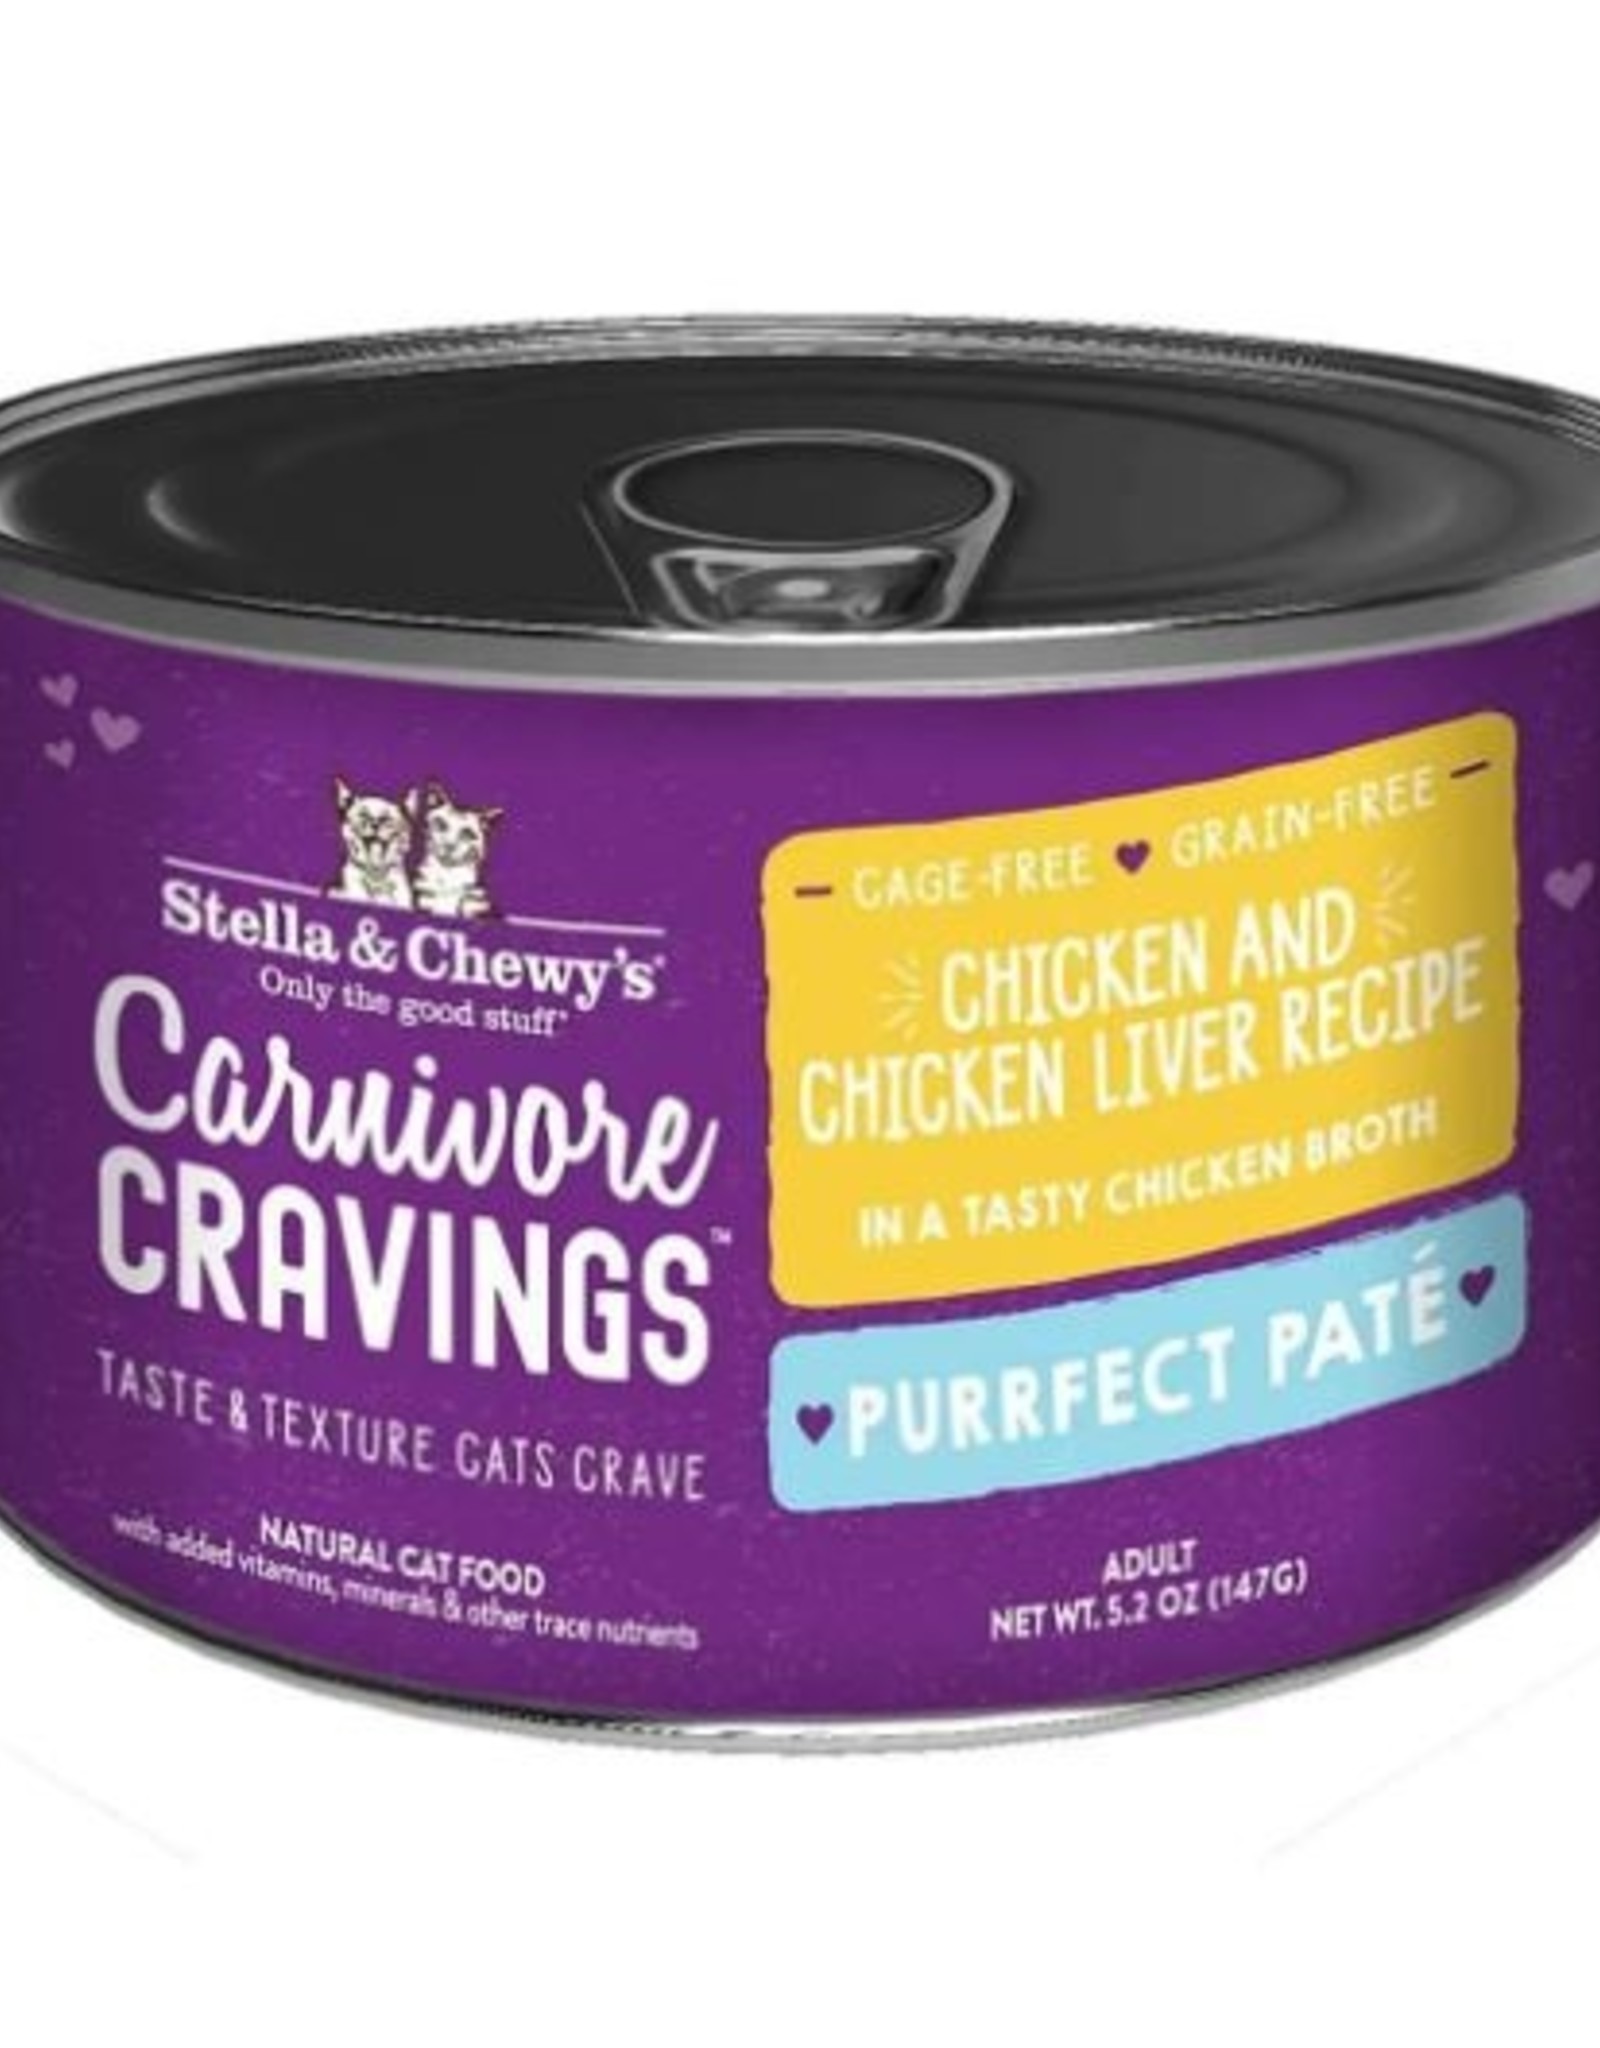 Stella & Chewy's Cat Cravings Chicken/Chickenliver Pate 5.2 oz.